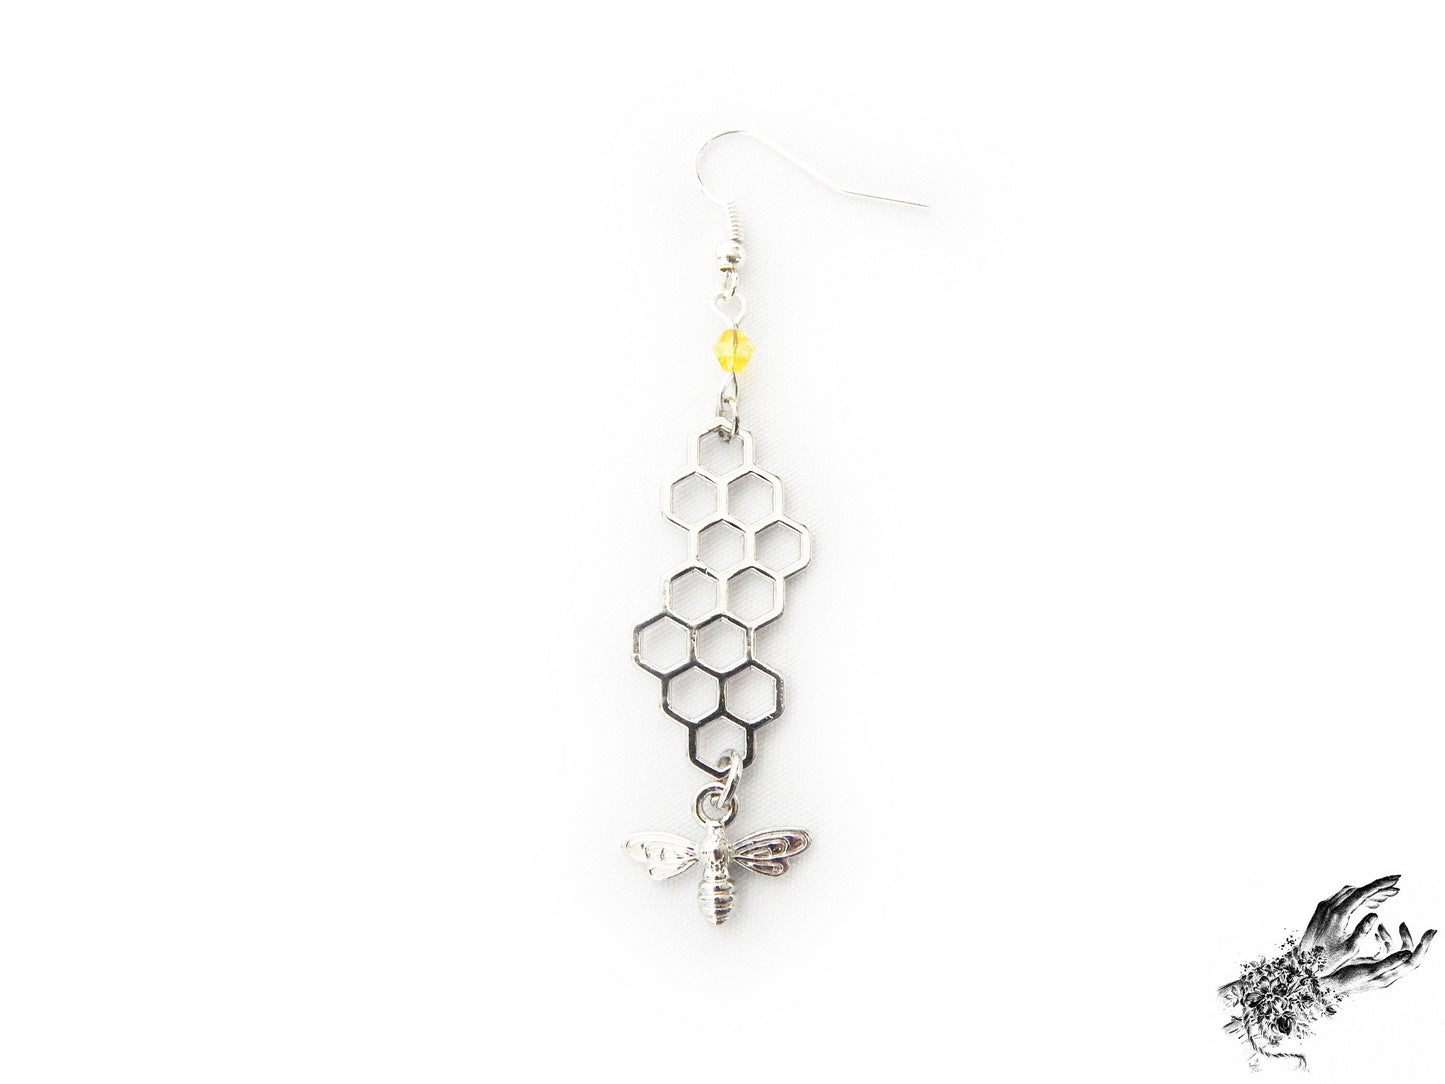 Antique Silver Honeycomb Earrings